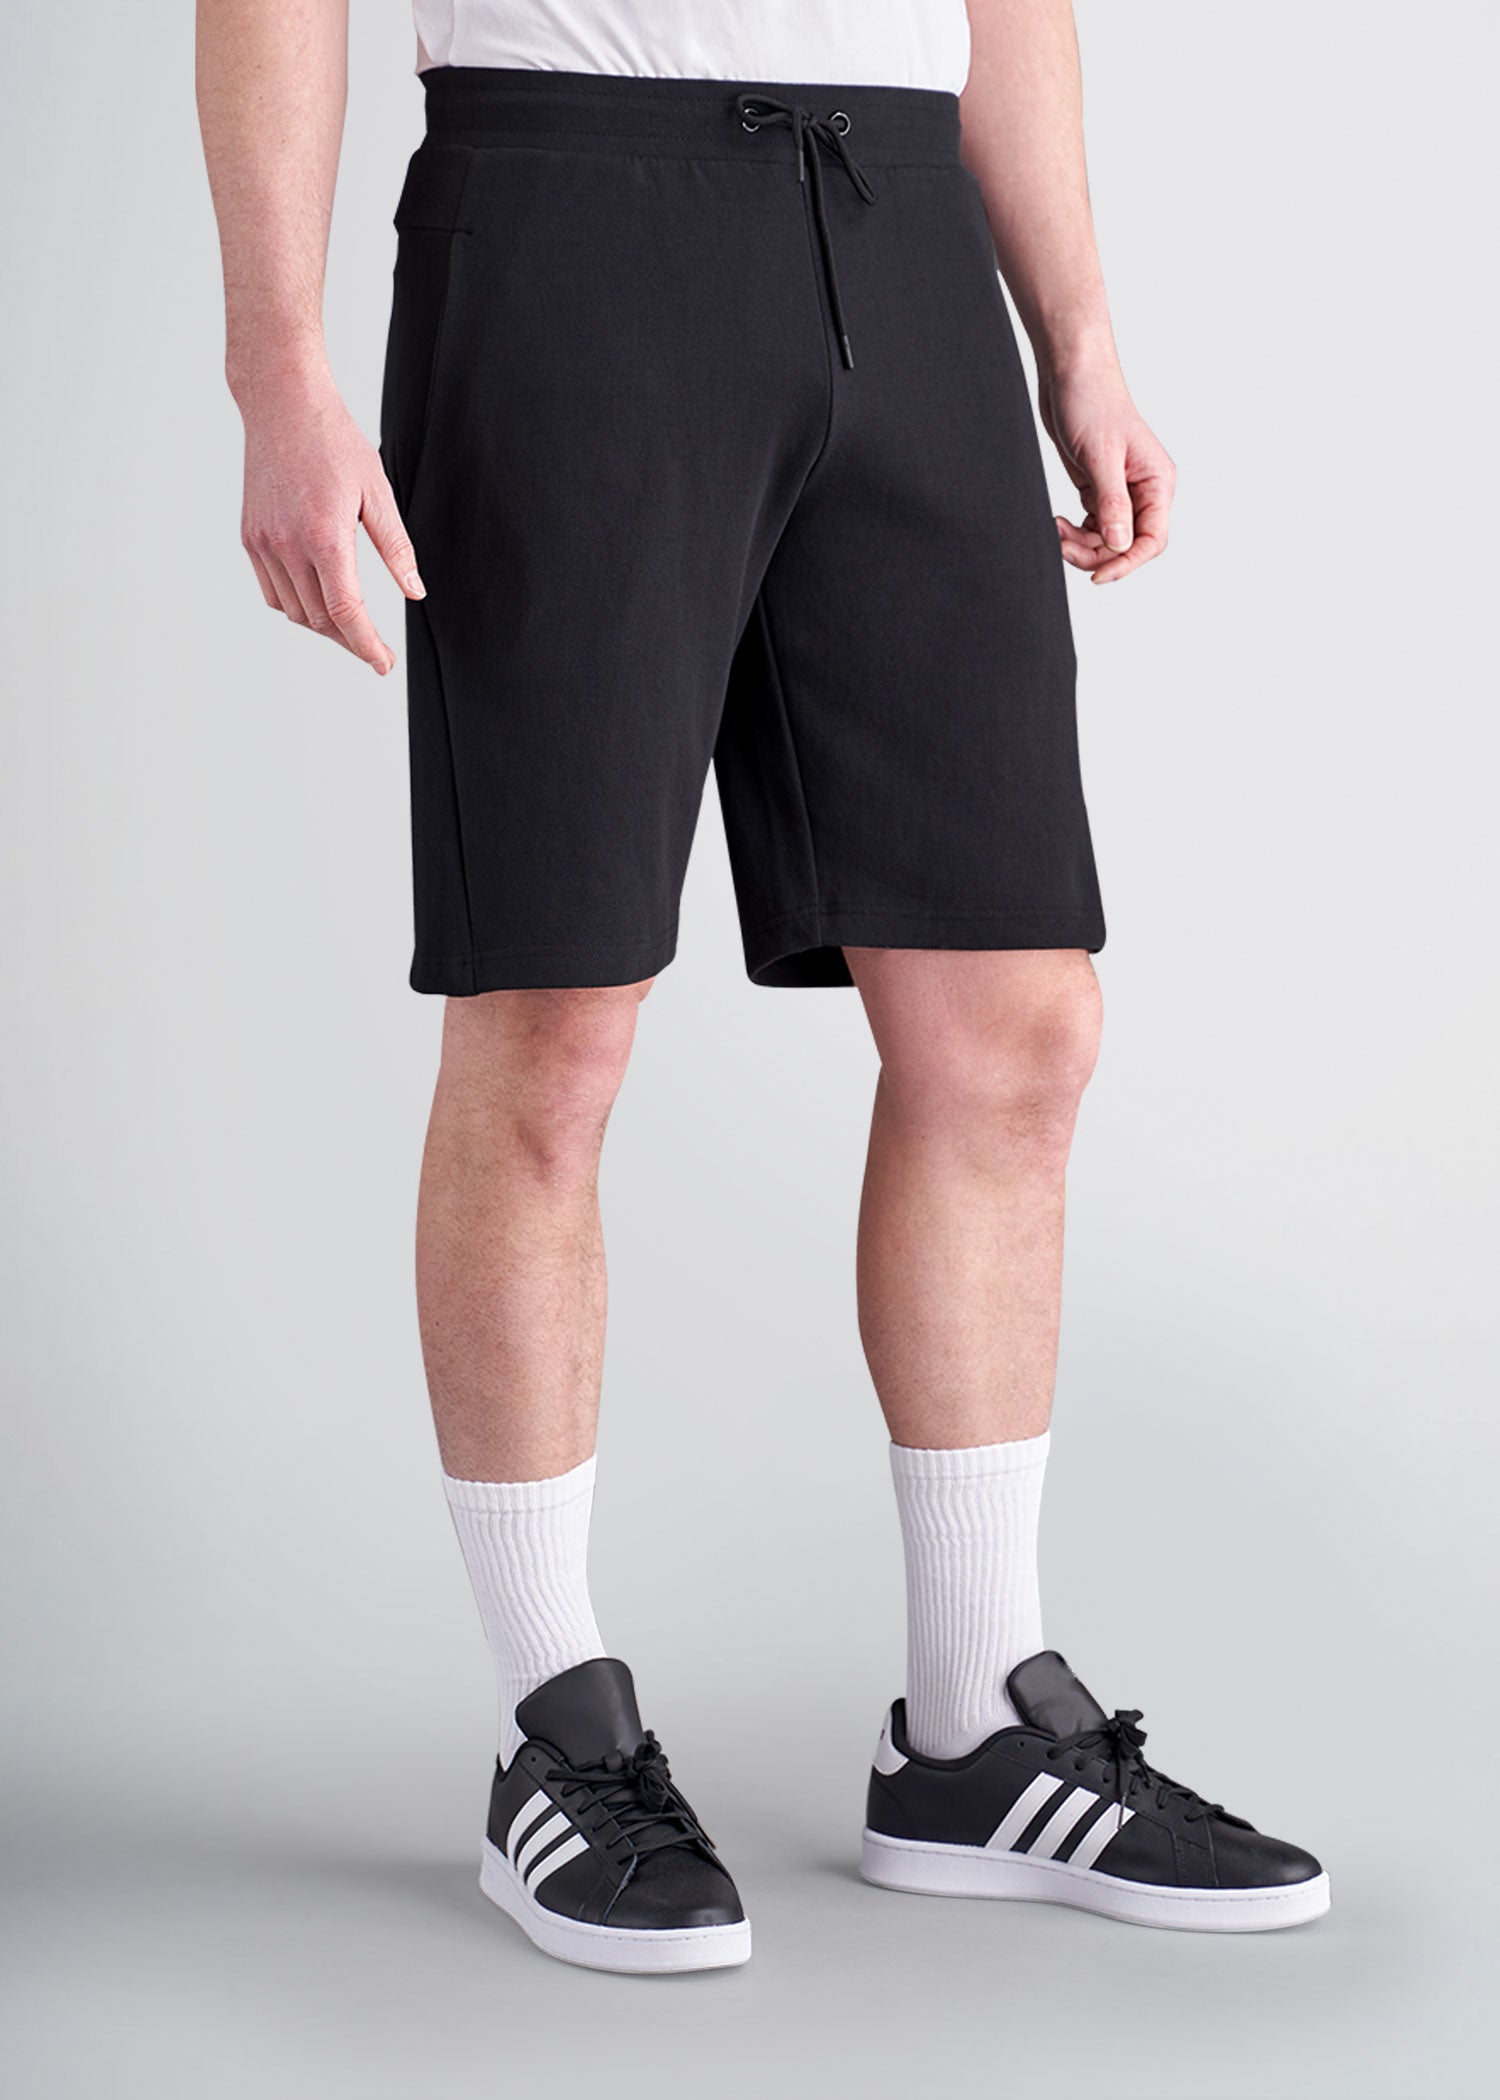 american-tall-mens-knit-athletic-shorts-black-front